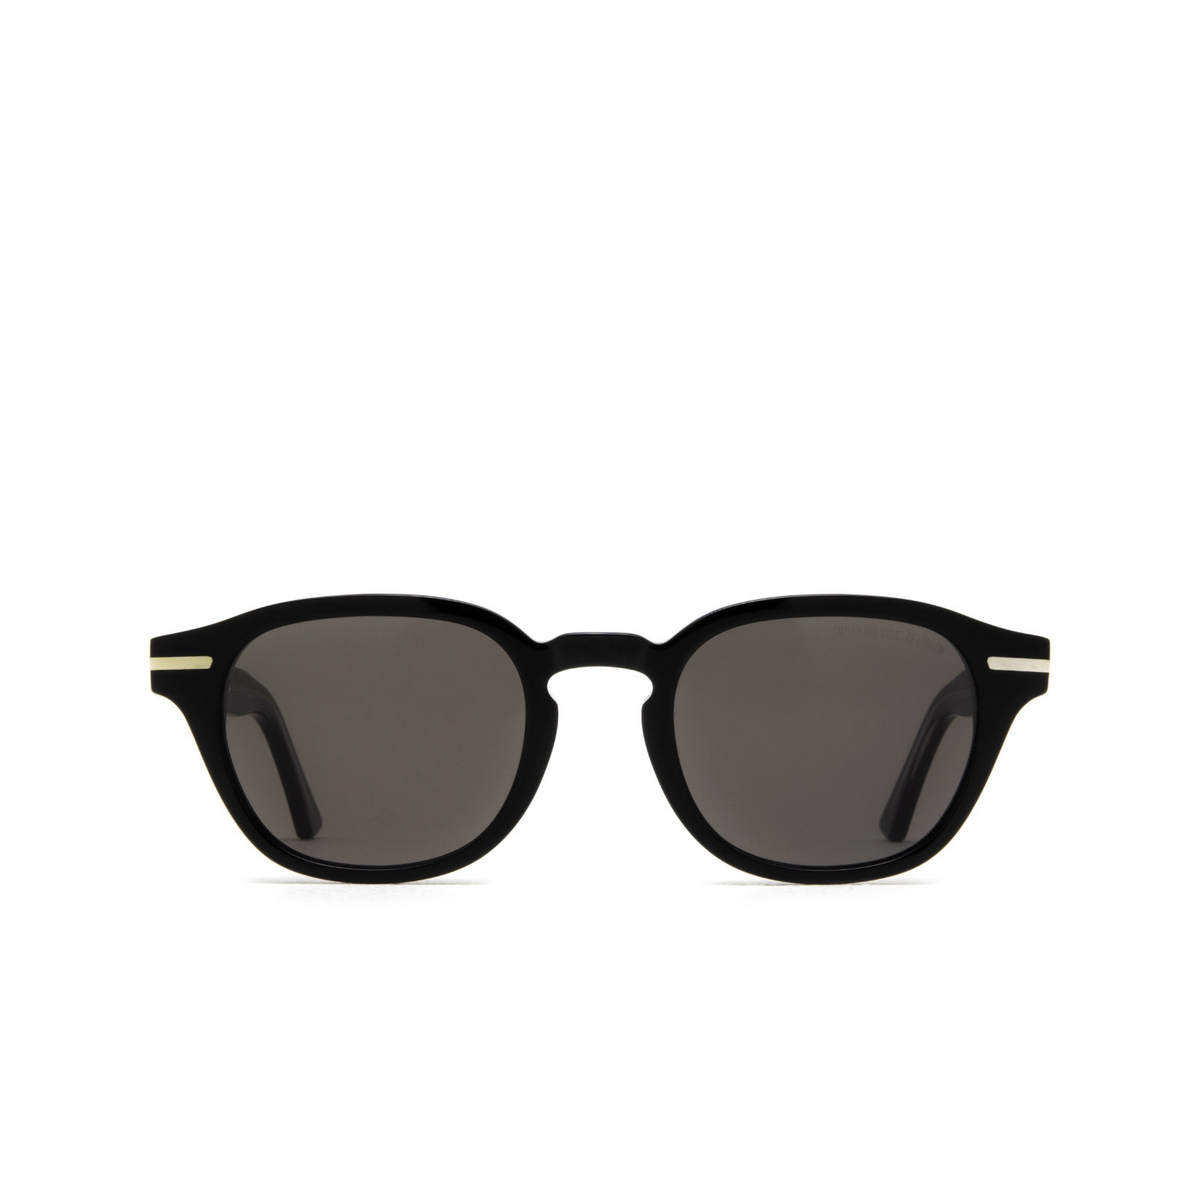 Cutler and Gross® Square Sunglasses: 1356 SUN color Black Taxi 05 - front view.